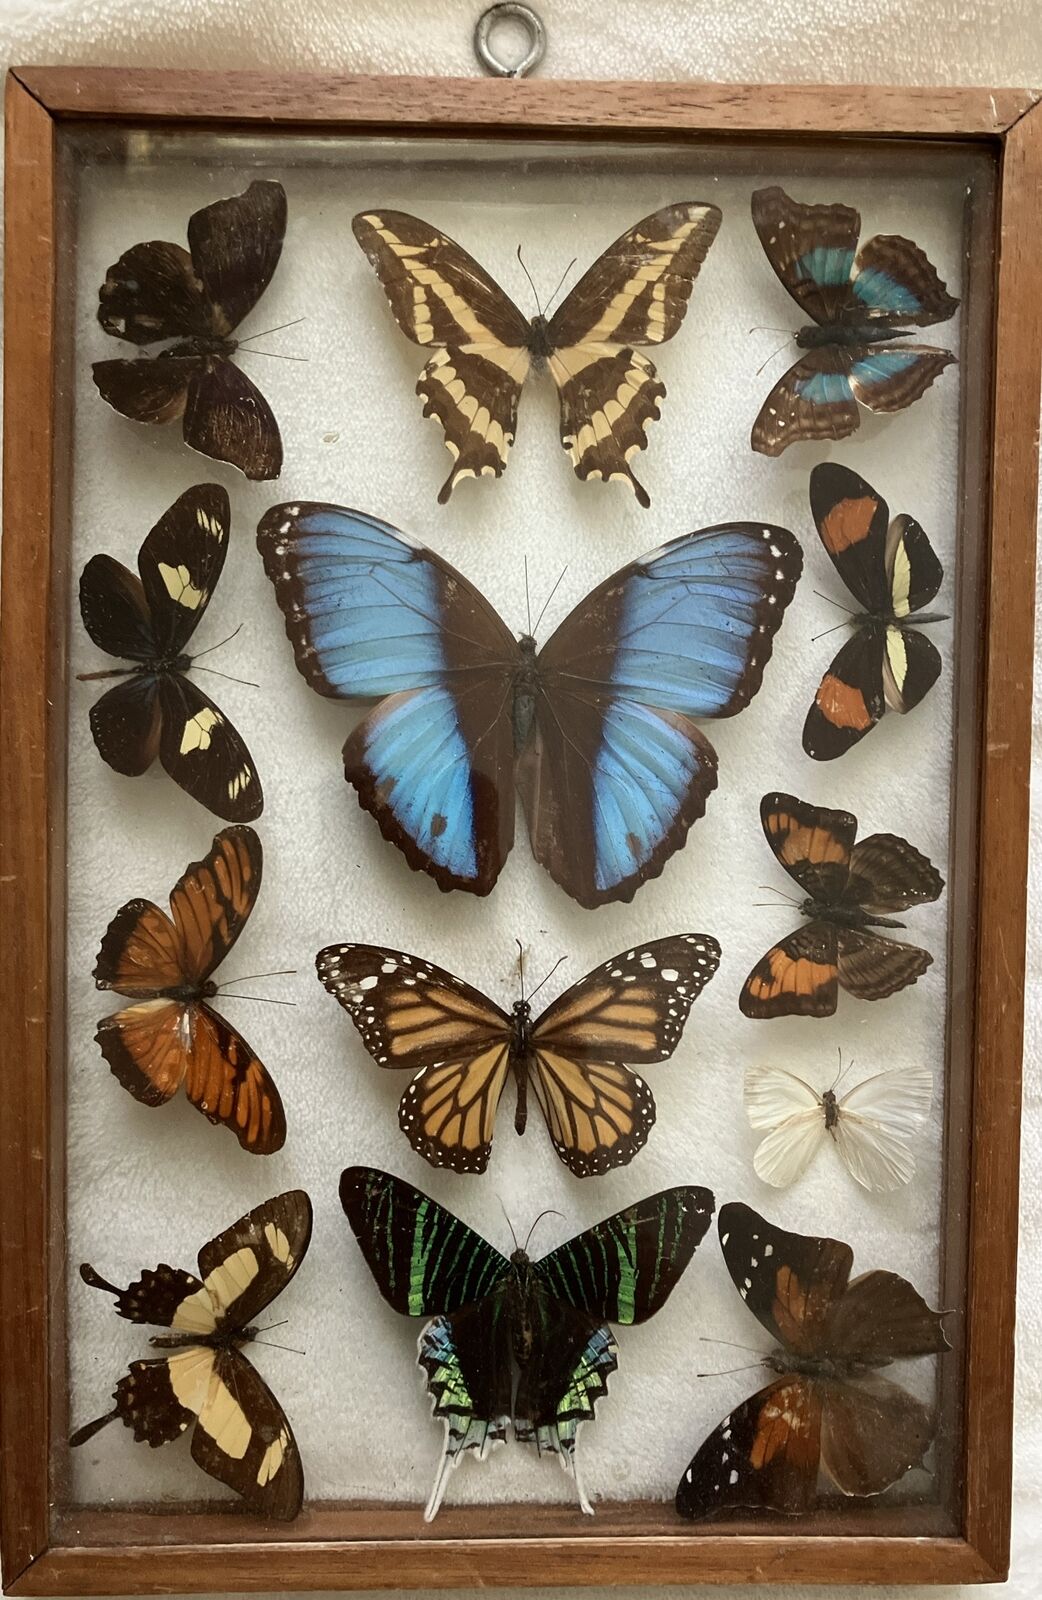 13 VTG Butterfly Taxidermy Display Case Framed Assorted Collection.